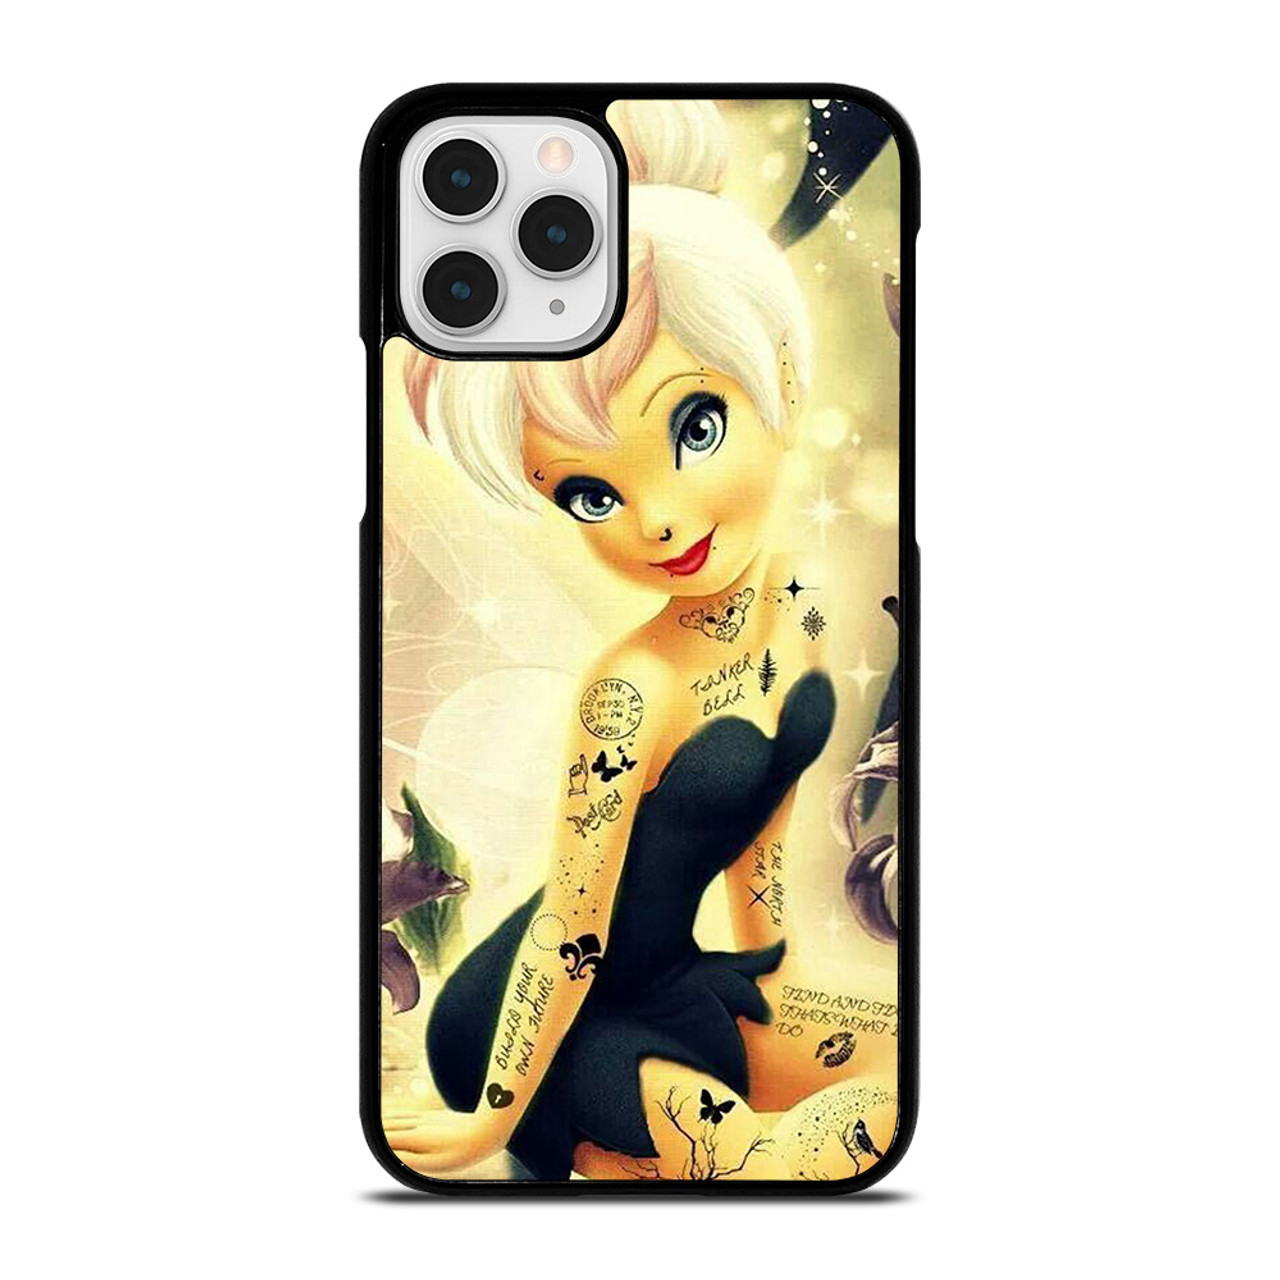 GOTHIC TINKERBELL TATTOO DISNEY iPhone 11 Pro Case Cover